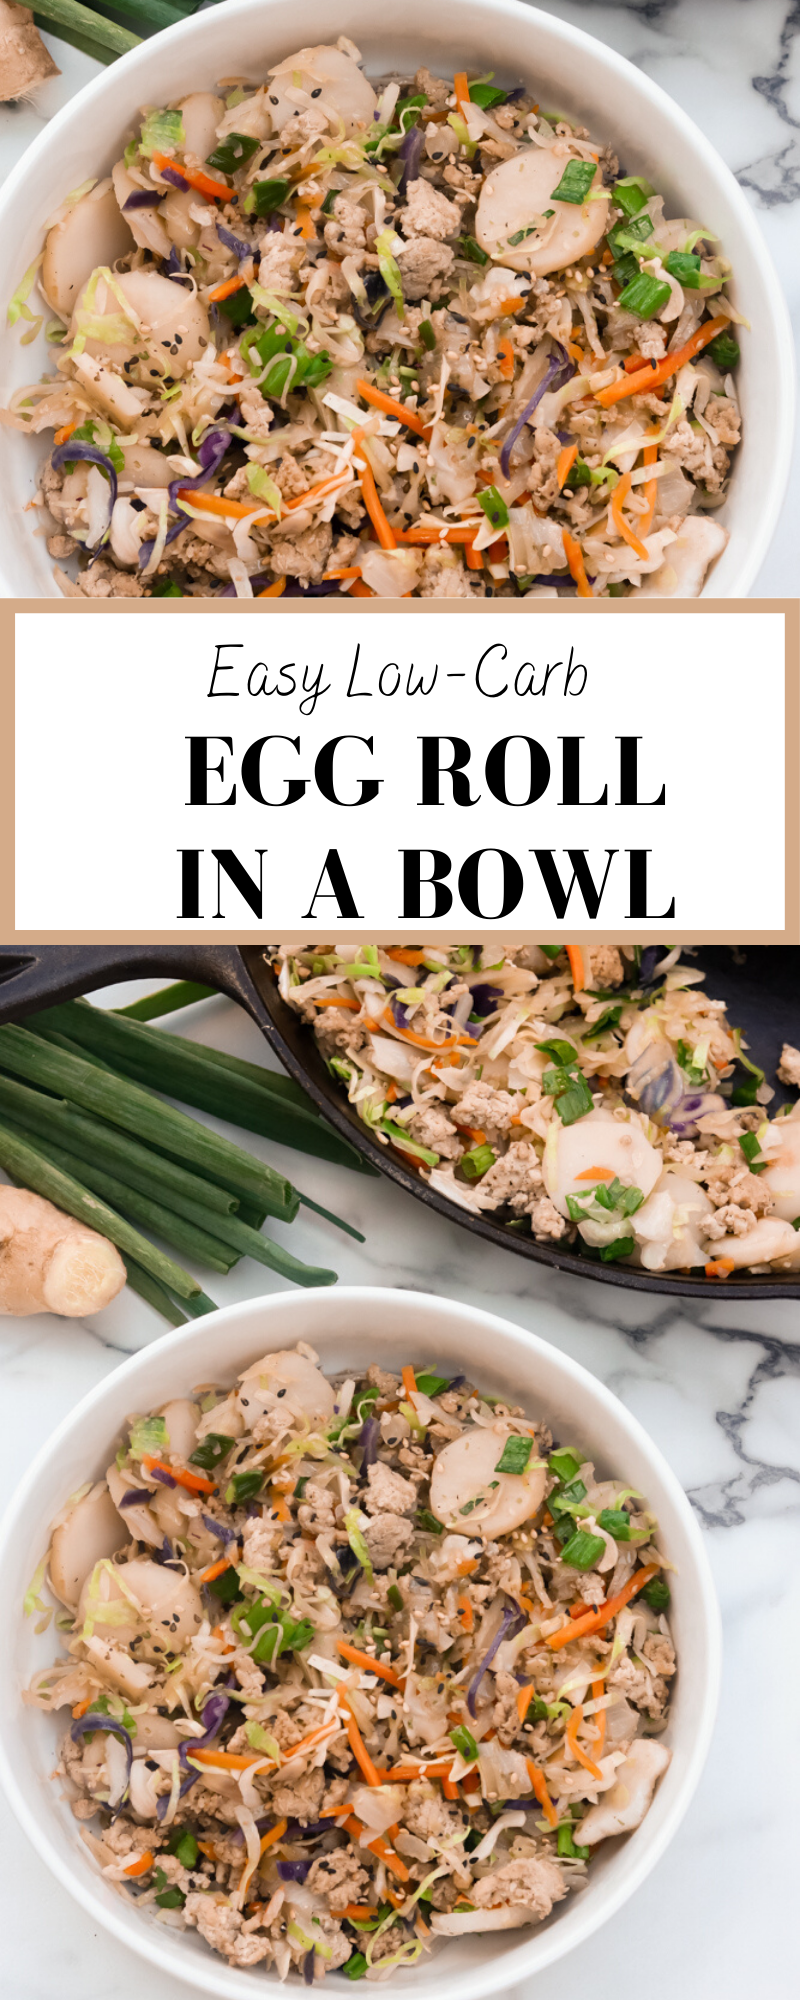 This easy one pan low-carb egg roll in a bowl recipe is a healthier alternative to your traditional egg roll. It has all the yummy flavor without the wrapper.